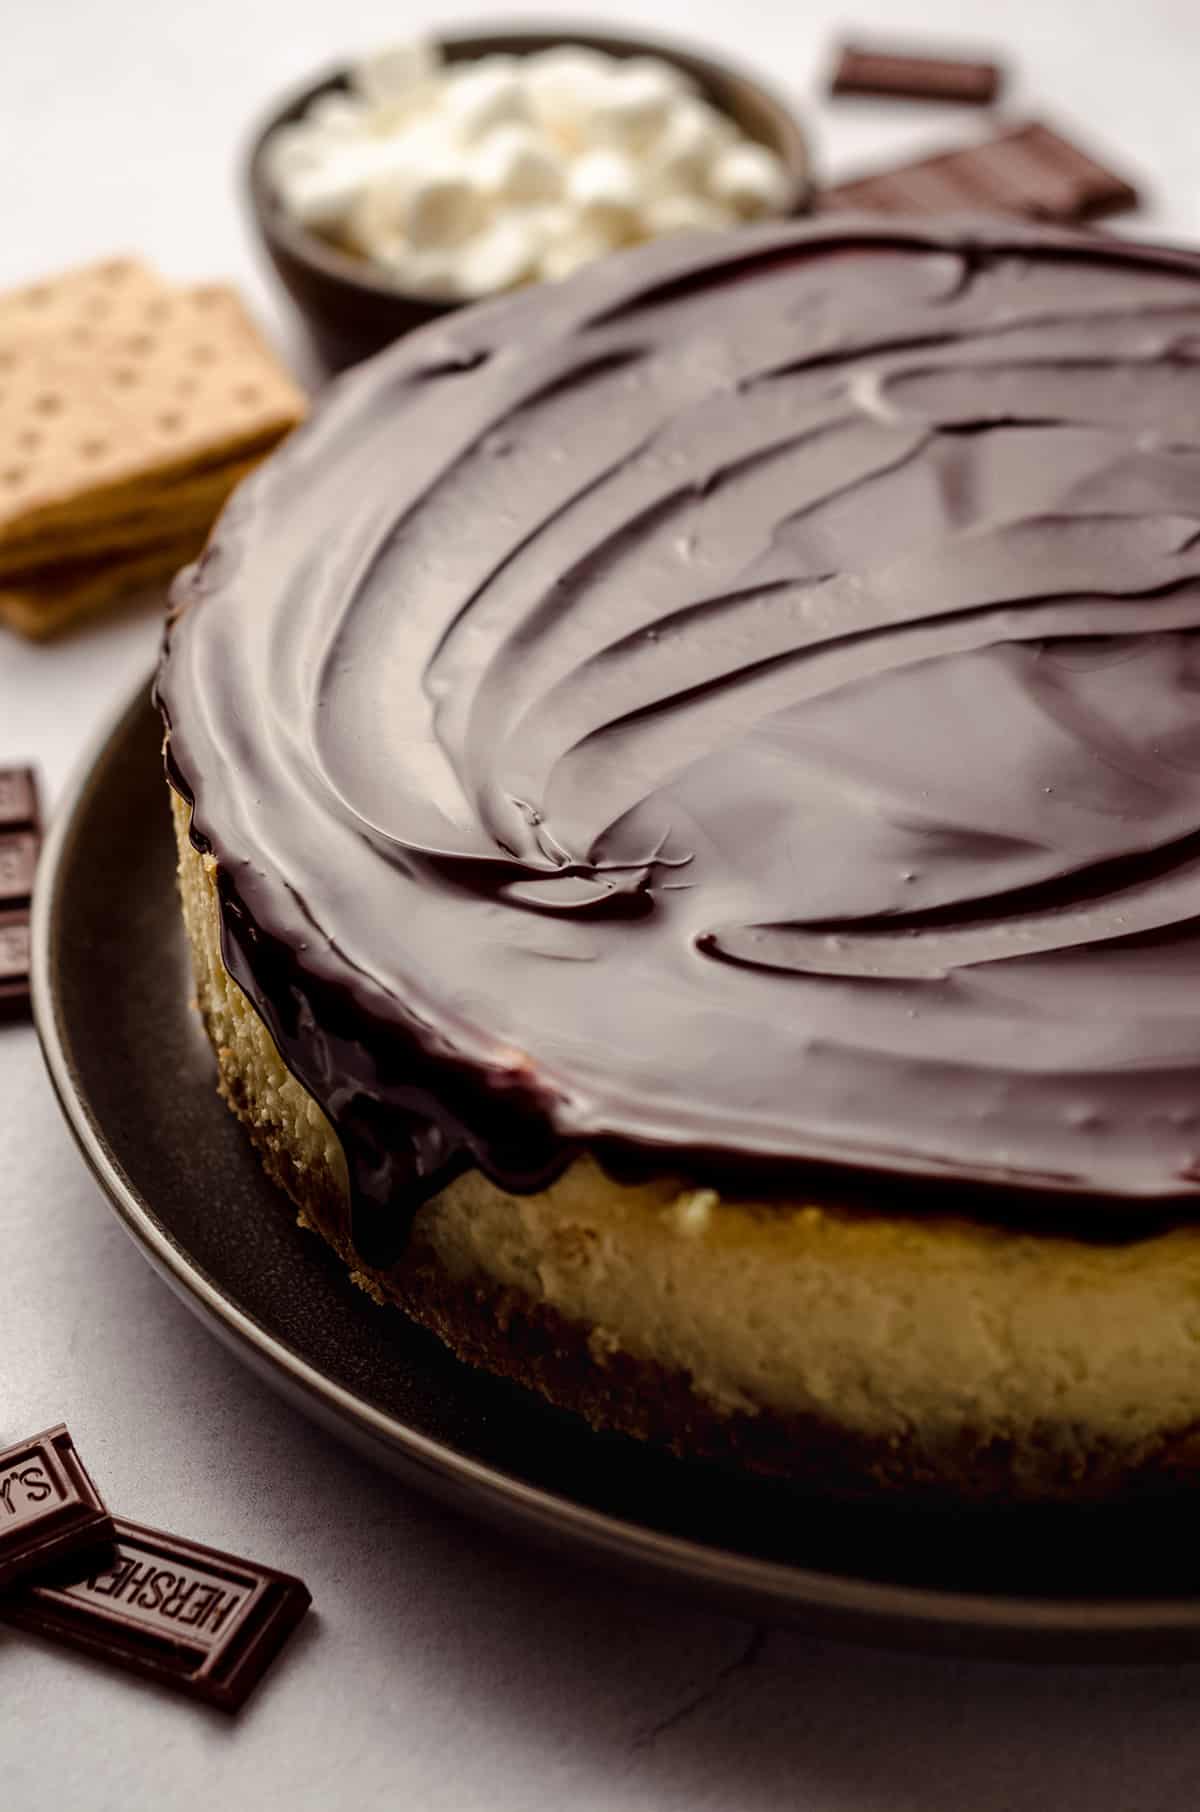 A smooth chocolate topping on a baked cheesecake.